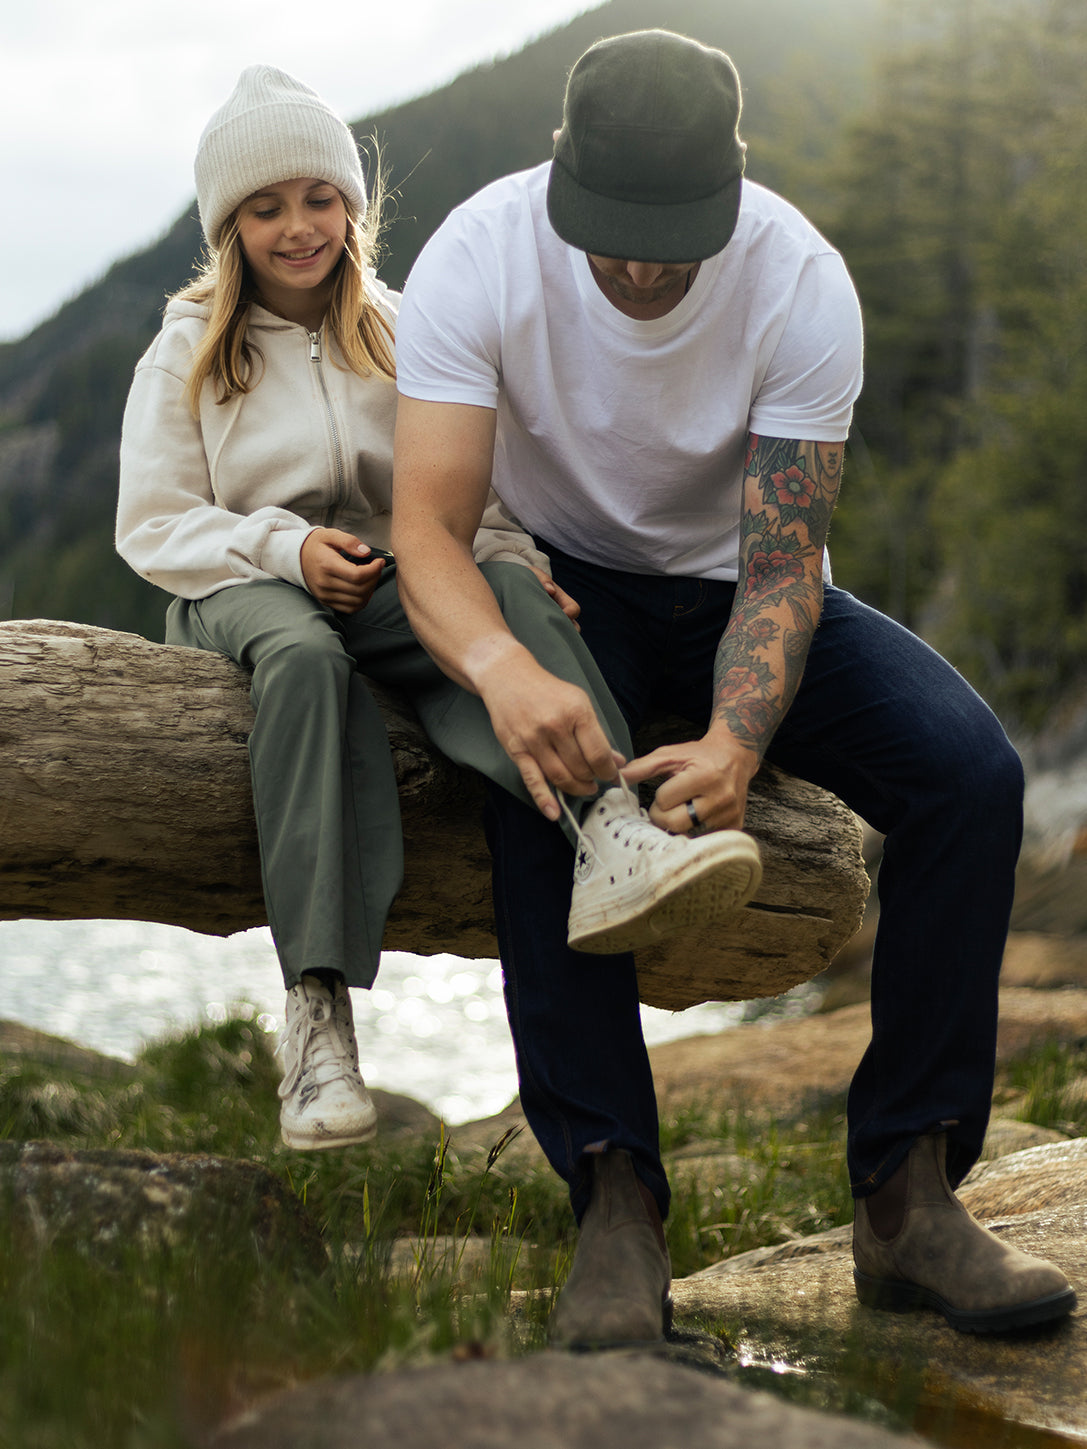 Man tying shoelaces of smiling girl on a log near water, with trees and hills in the background